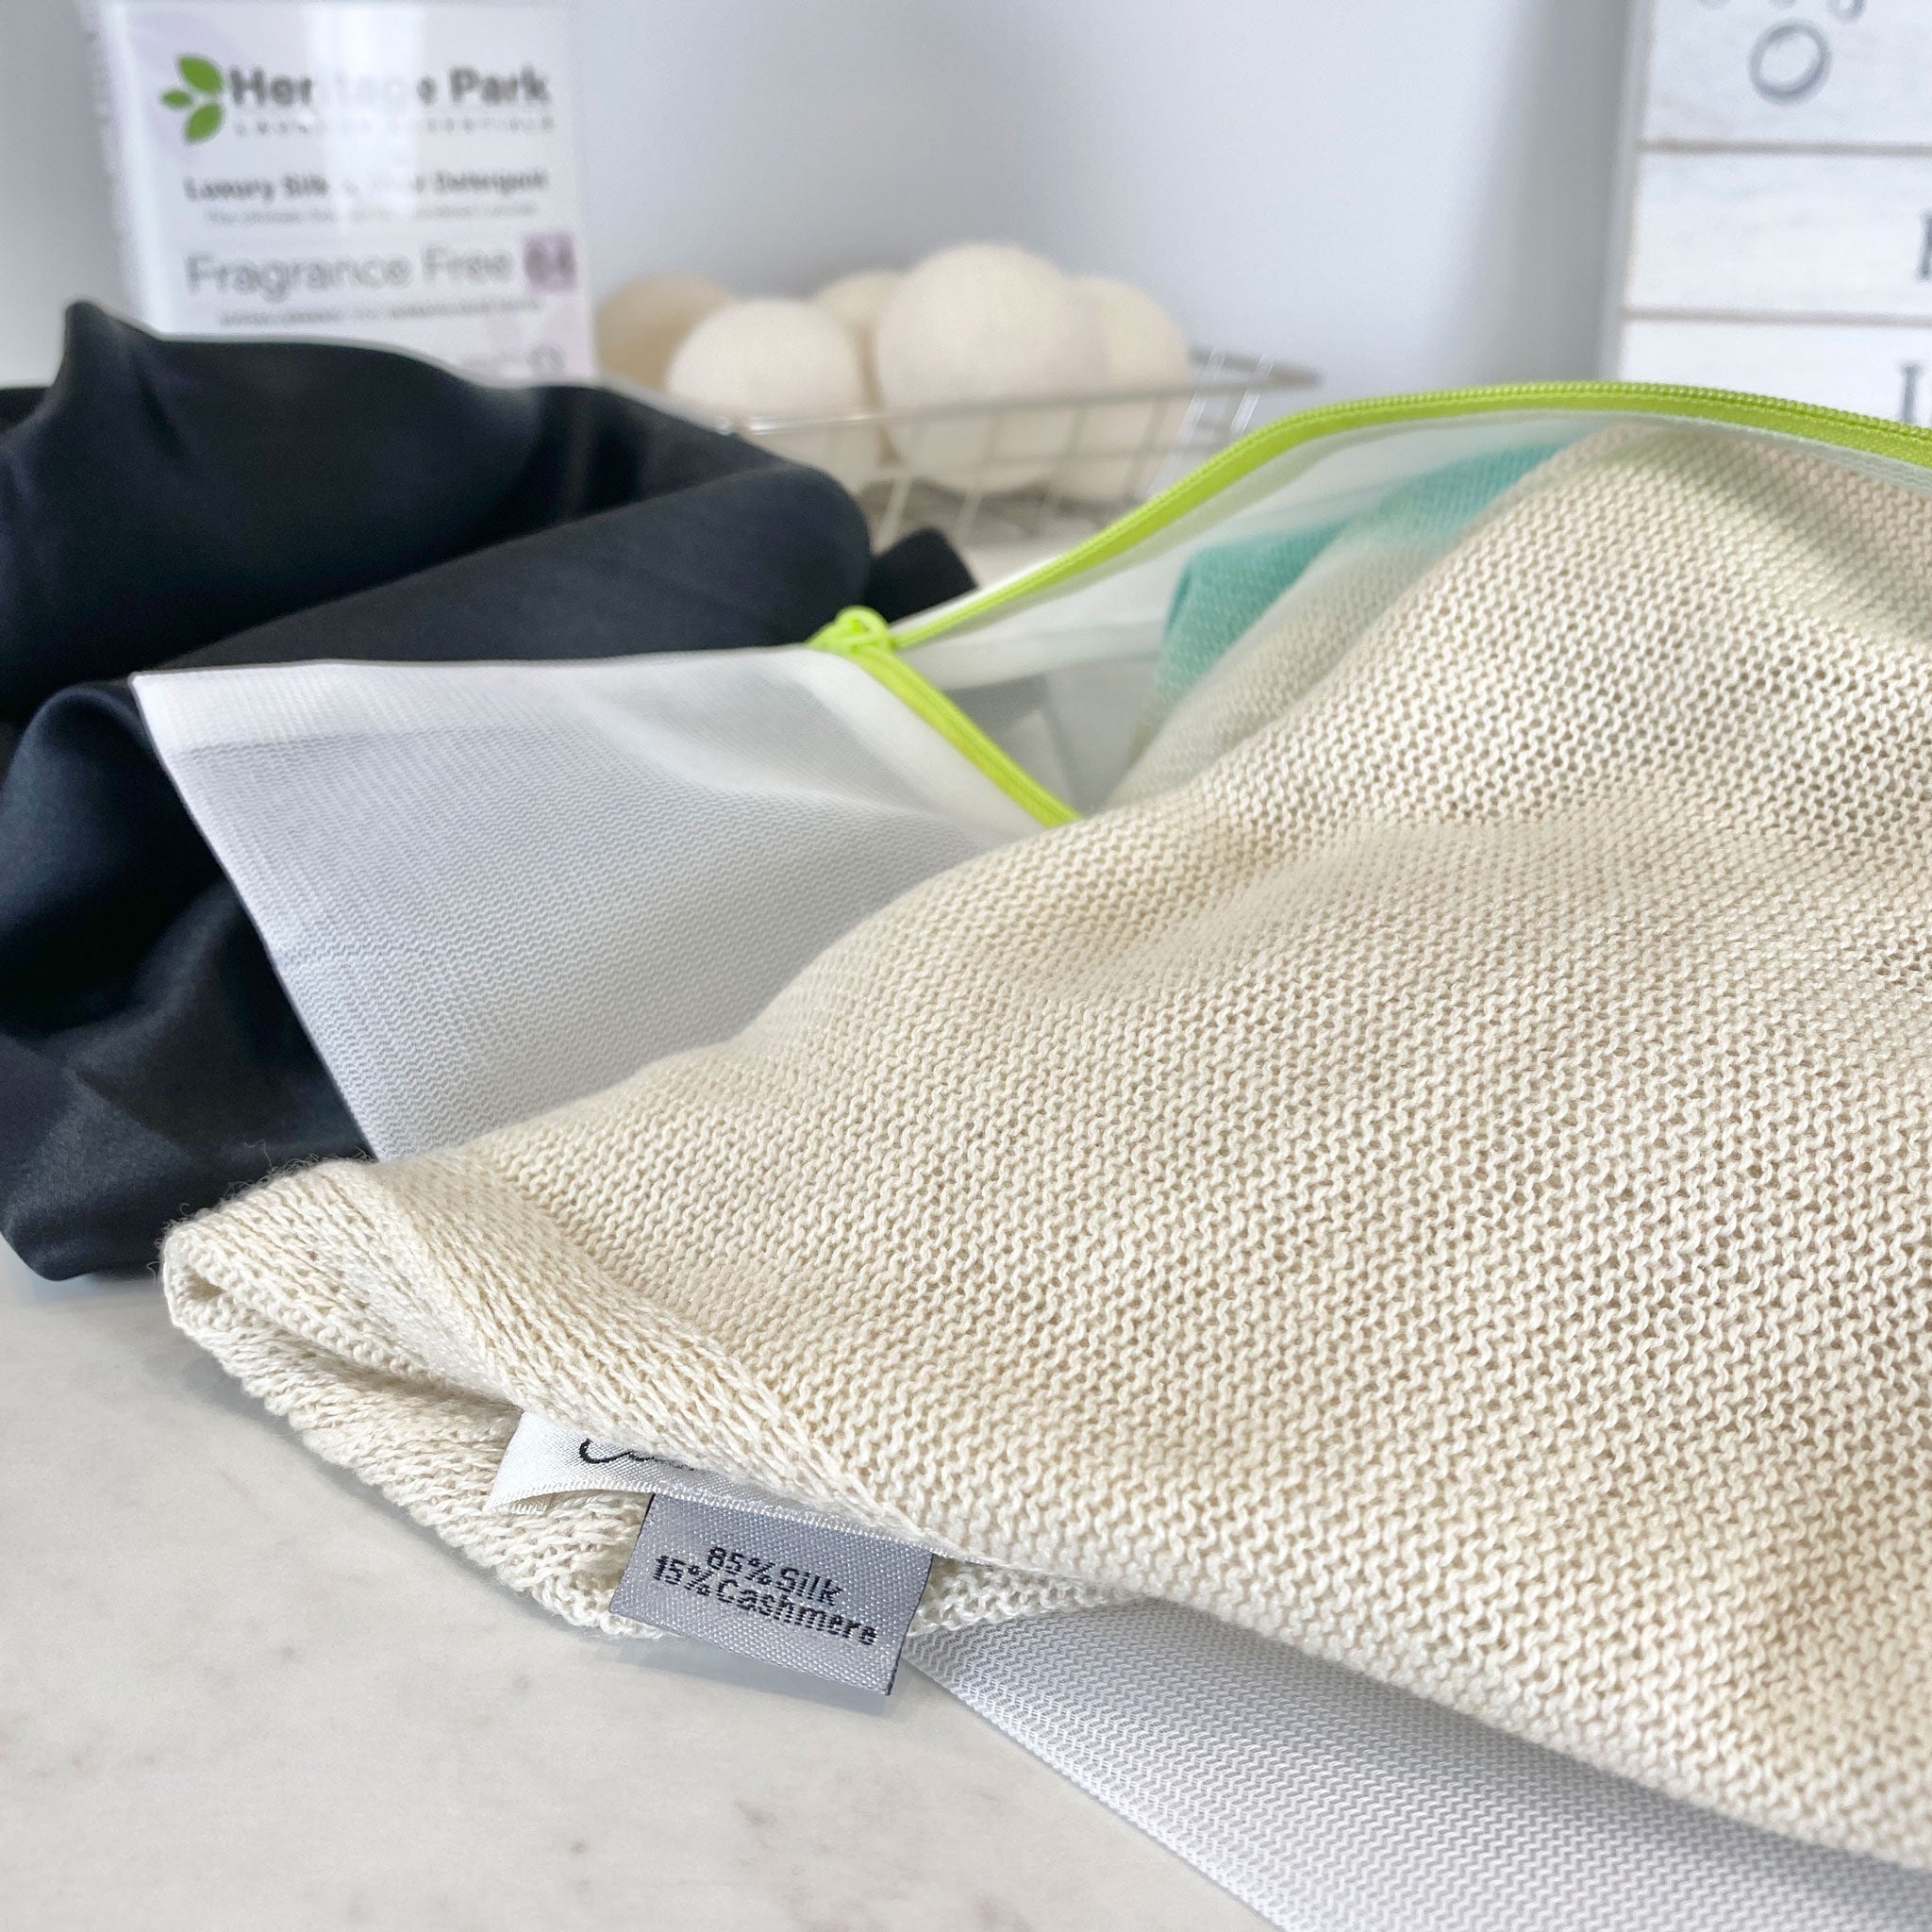 How To Wash Cashmere, Wool, Silk, and Other Luxury Fabrics Safely -  Heritage Park Laundry Essentials